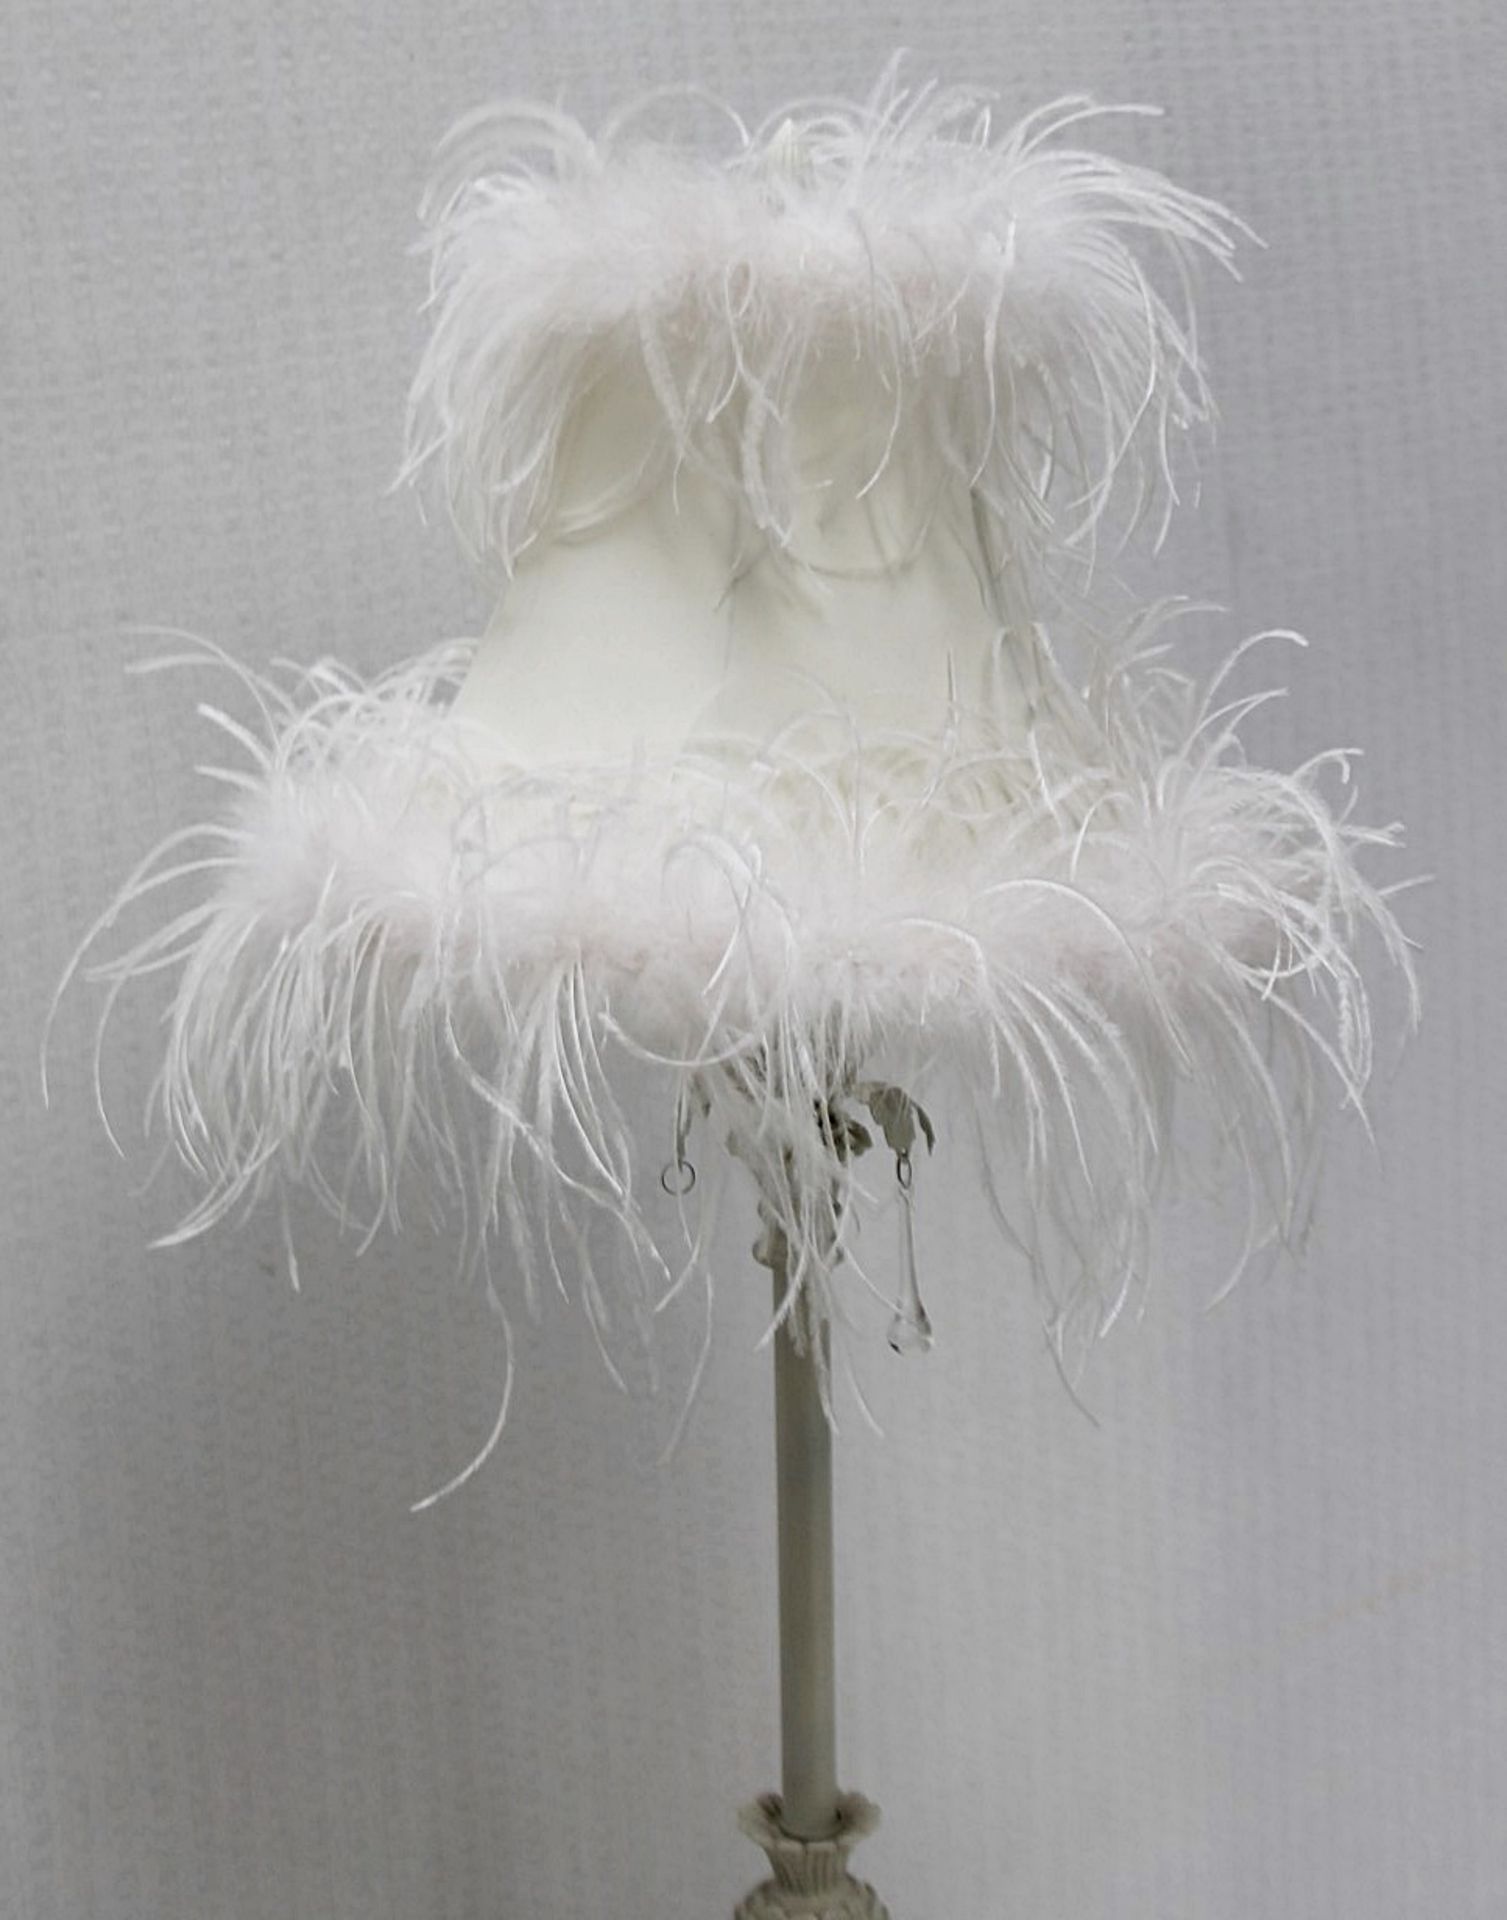 1 x Table Lamp Adored With Feathers And Glass Droplet Decoration - Recently Removed From A - Image 4 of 5